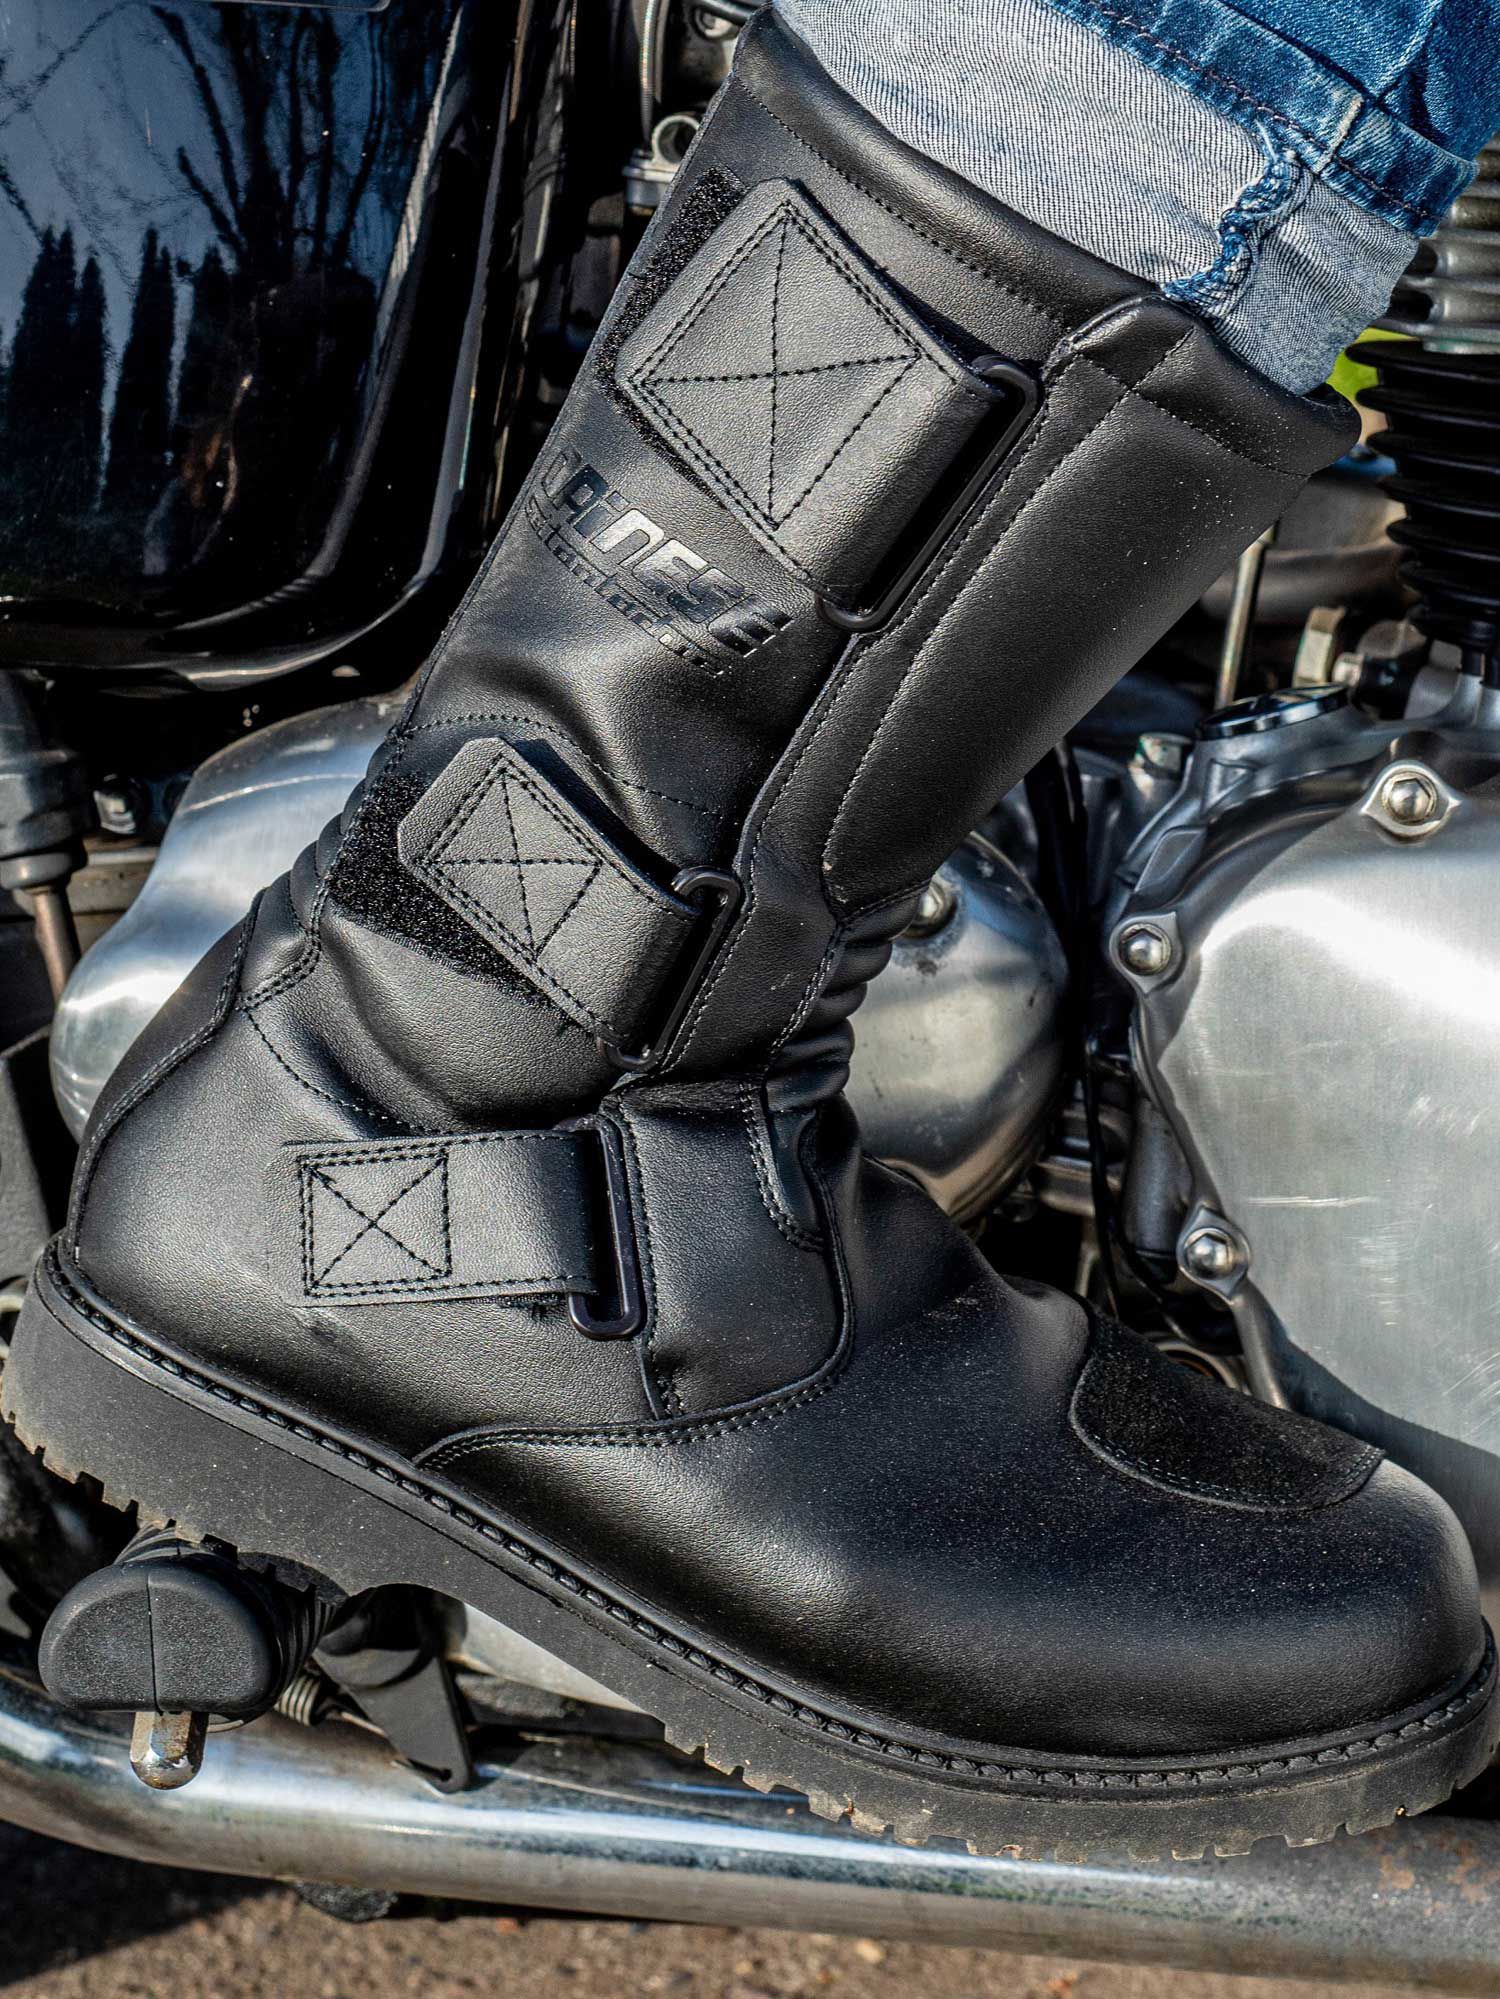 Boots Review | Motorcycle Cruiser